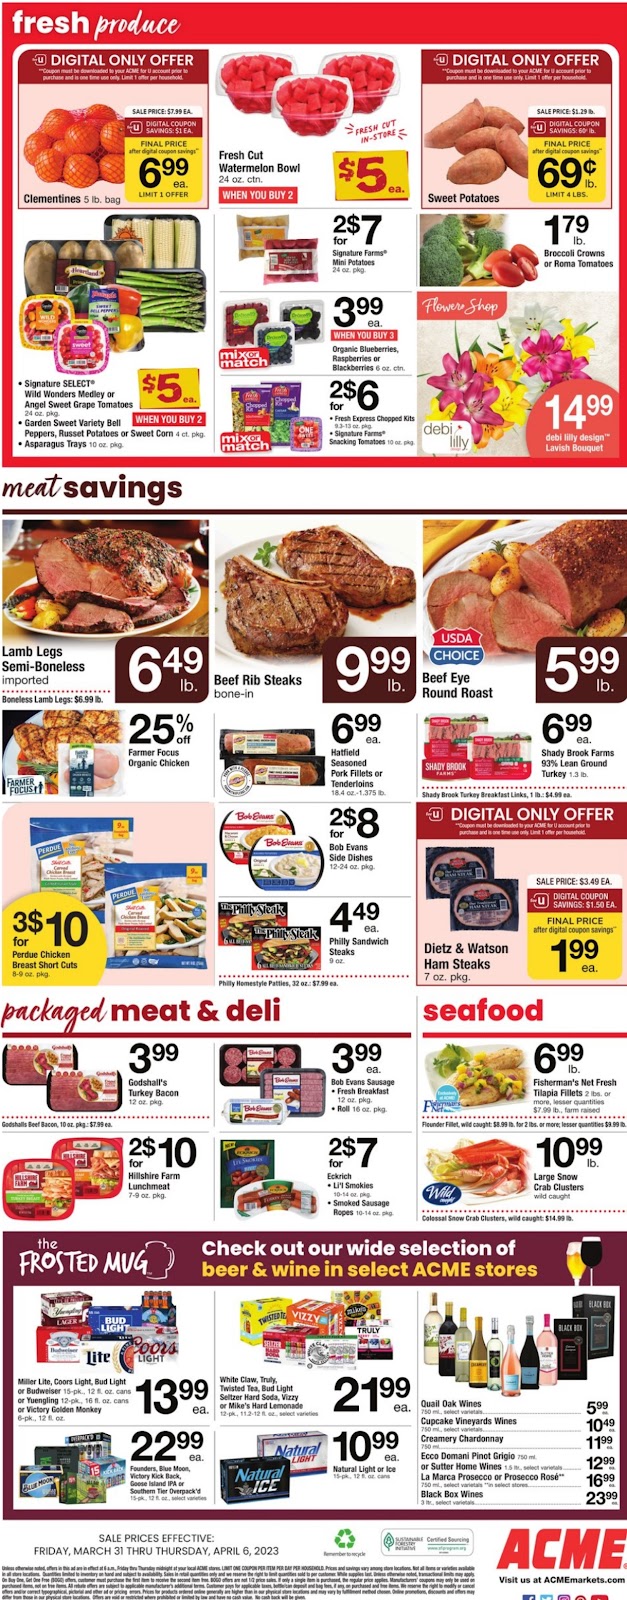 Acme Weekly Ad - 6